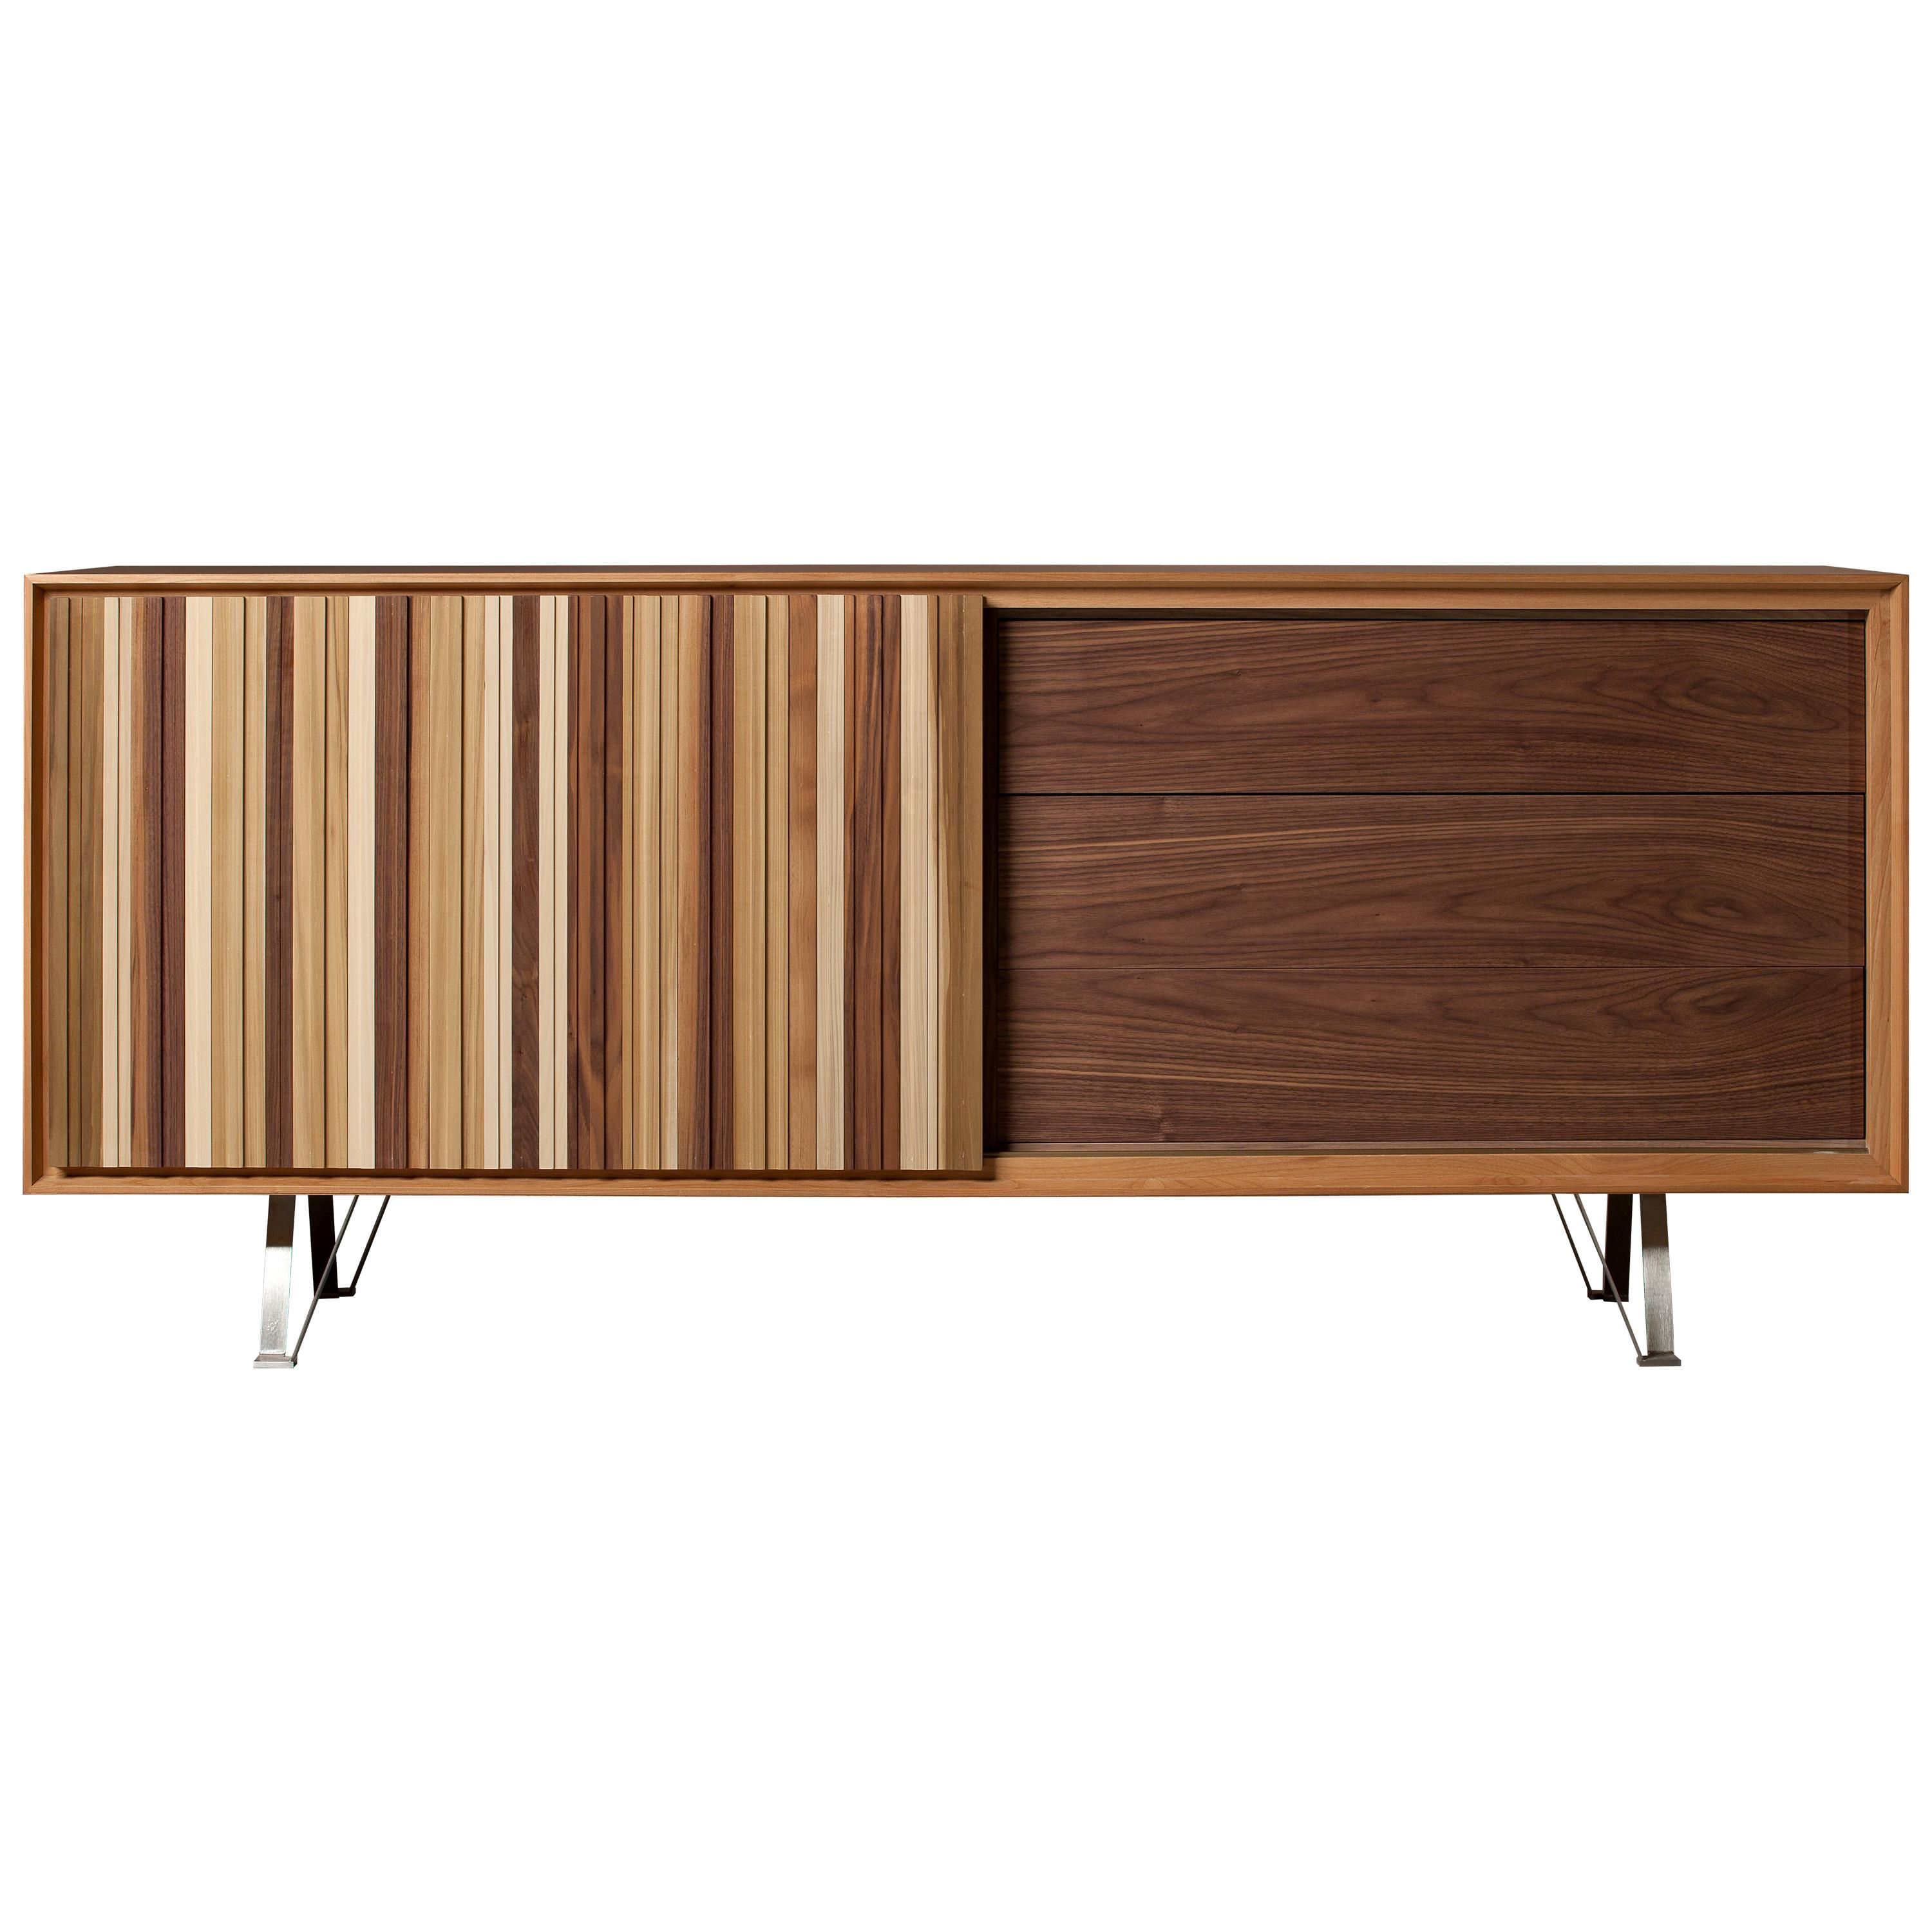 Sipario, Contemporary Sideboard Made Of Cherry Wood With Sliding Door And  Drawer Throughout Malibu 2 Door 1 Drawer Sideboards (View 17 of 30)